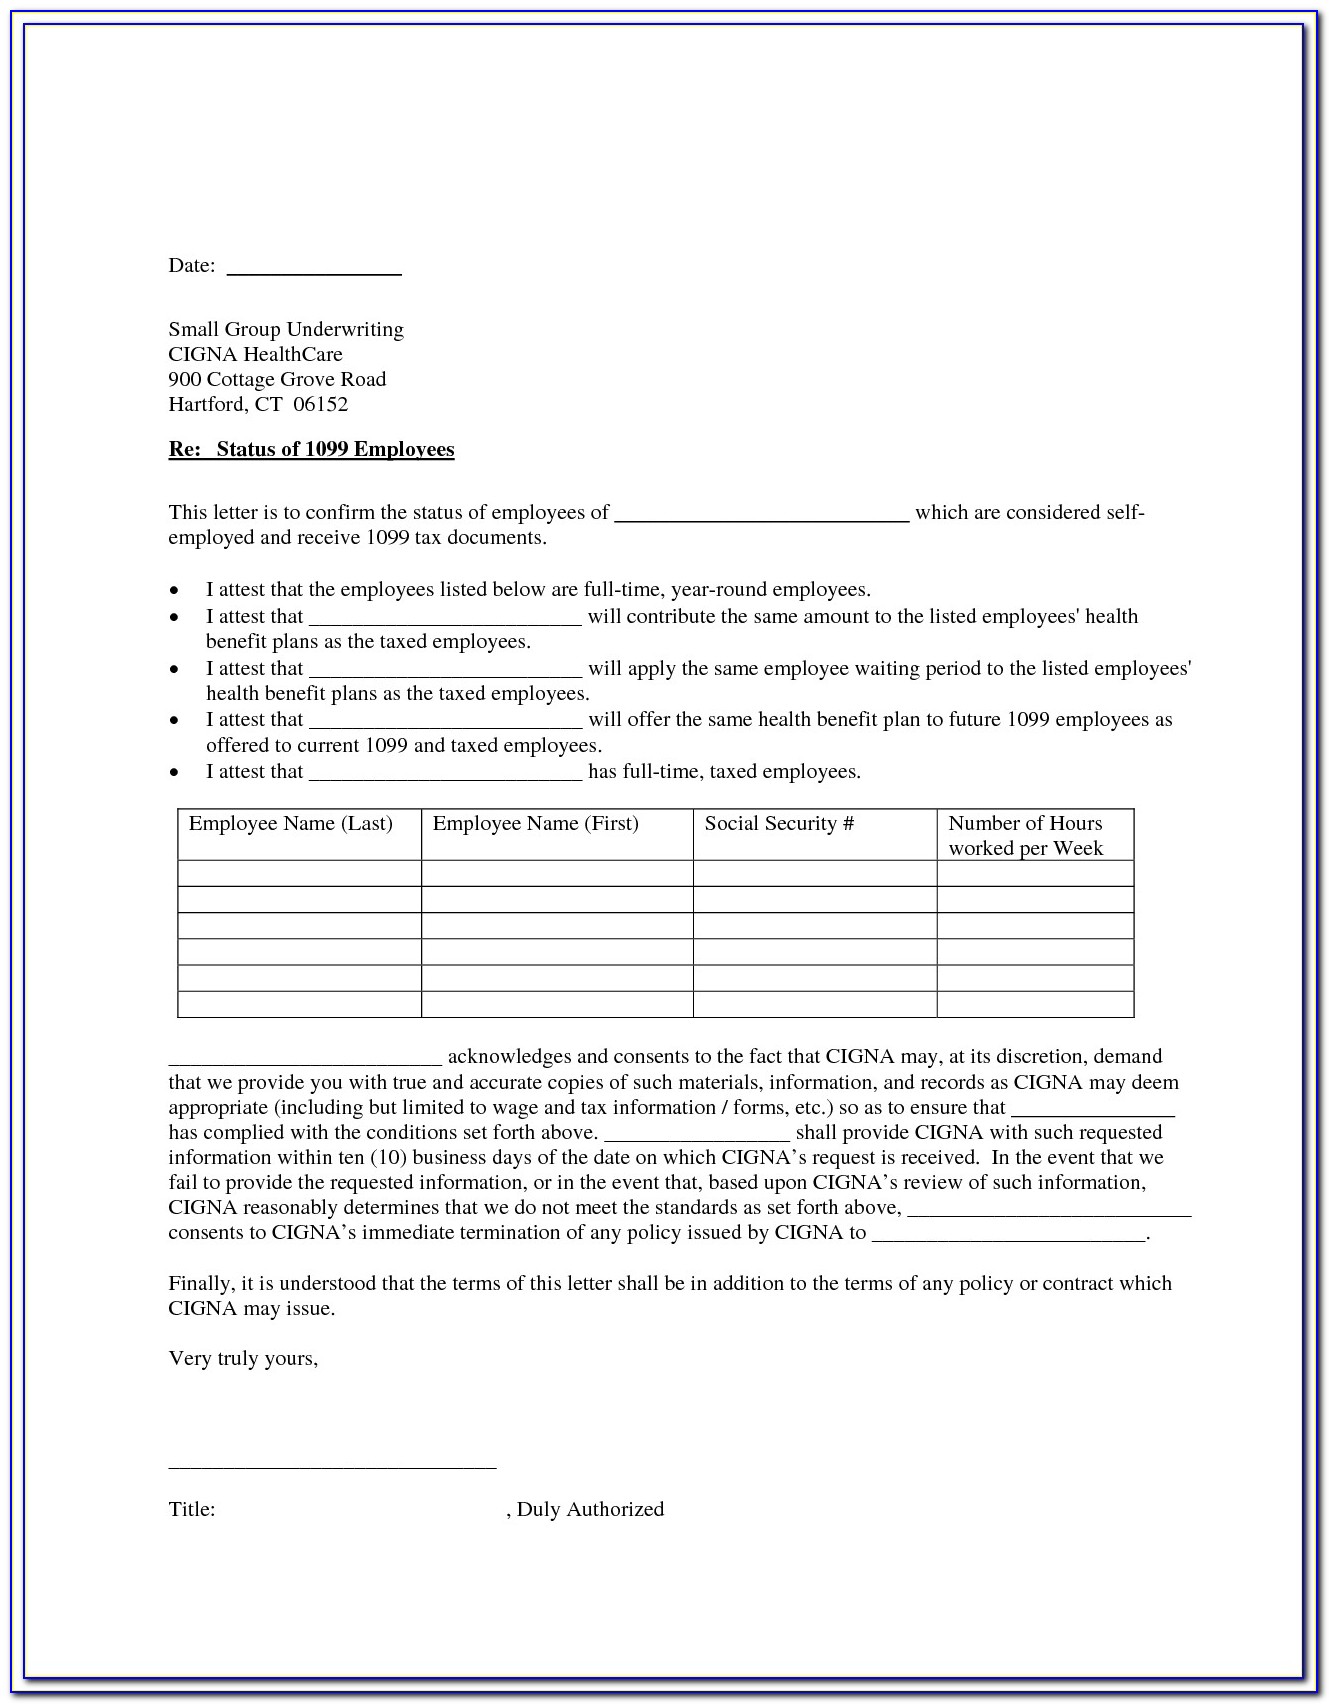 1099 Contract Employee Tax Form